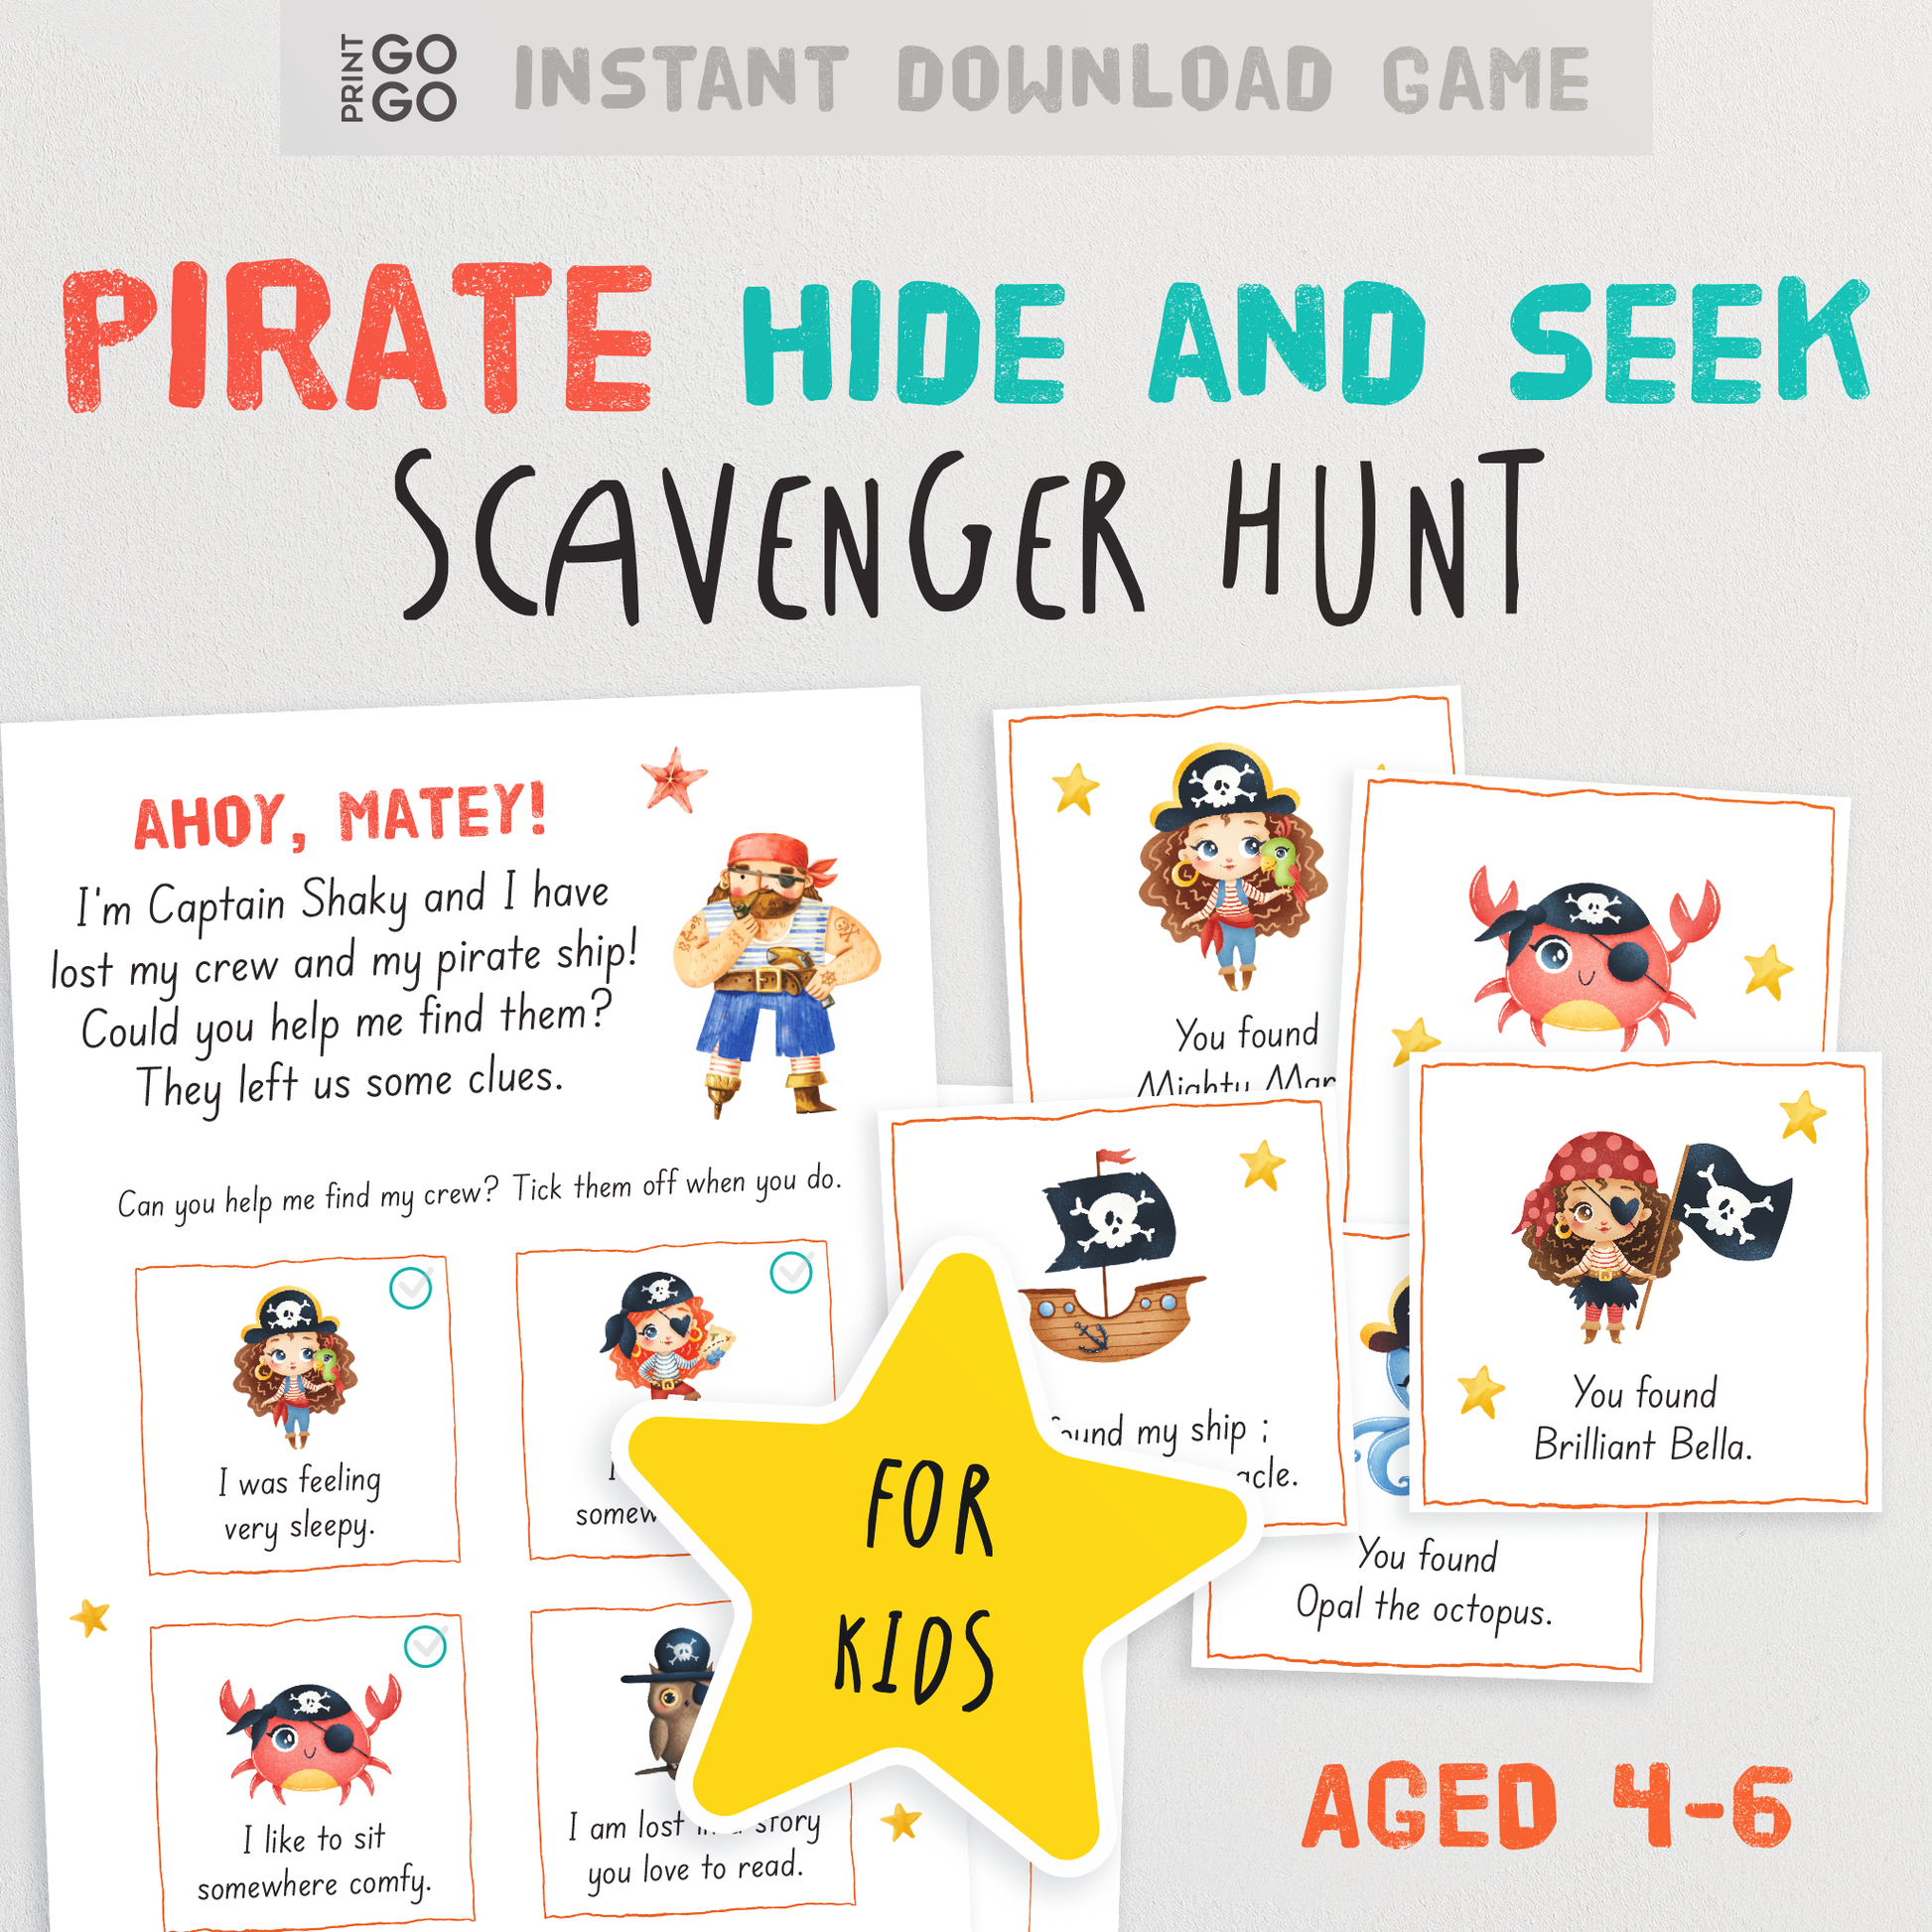 Pirate Hide and Seek Scavenger Hunt for Younger Kids